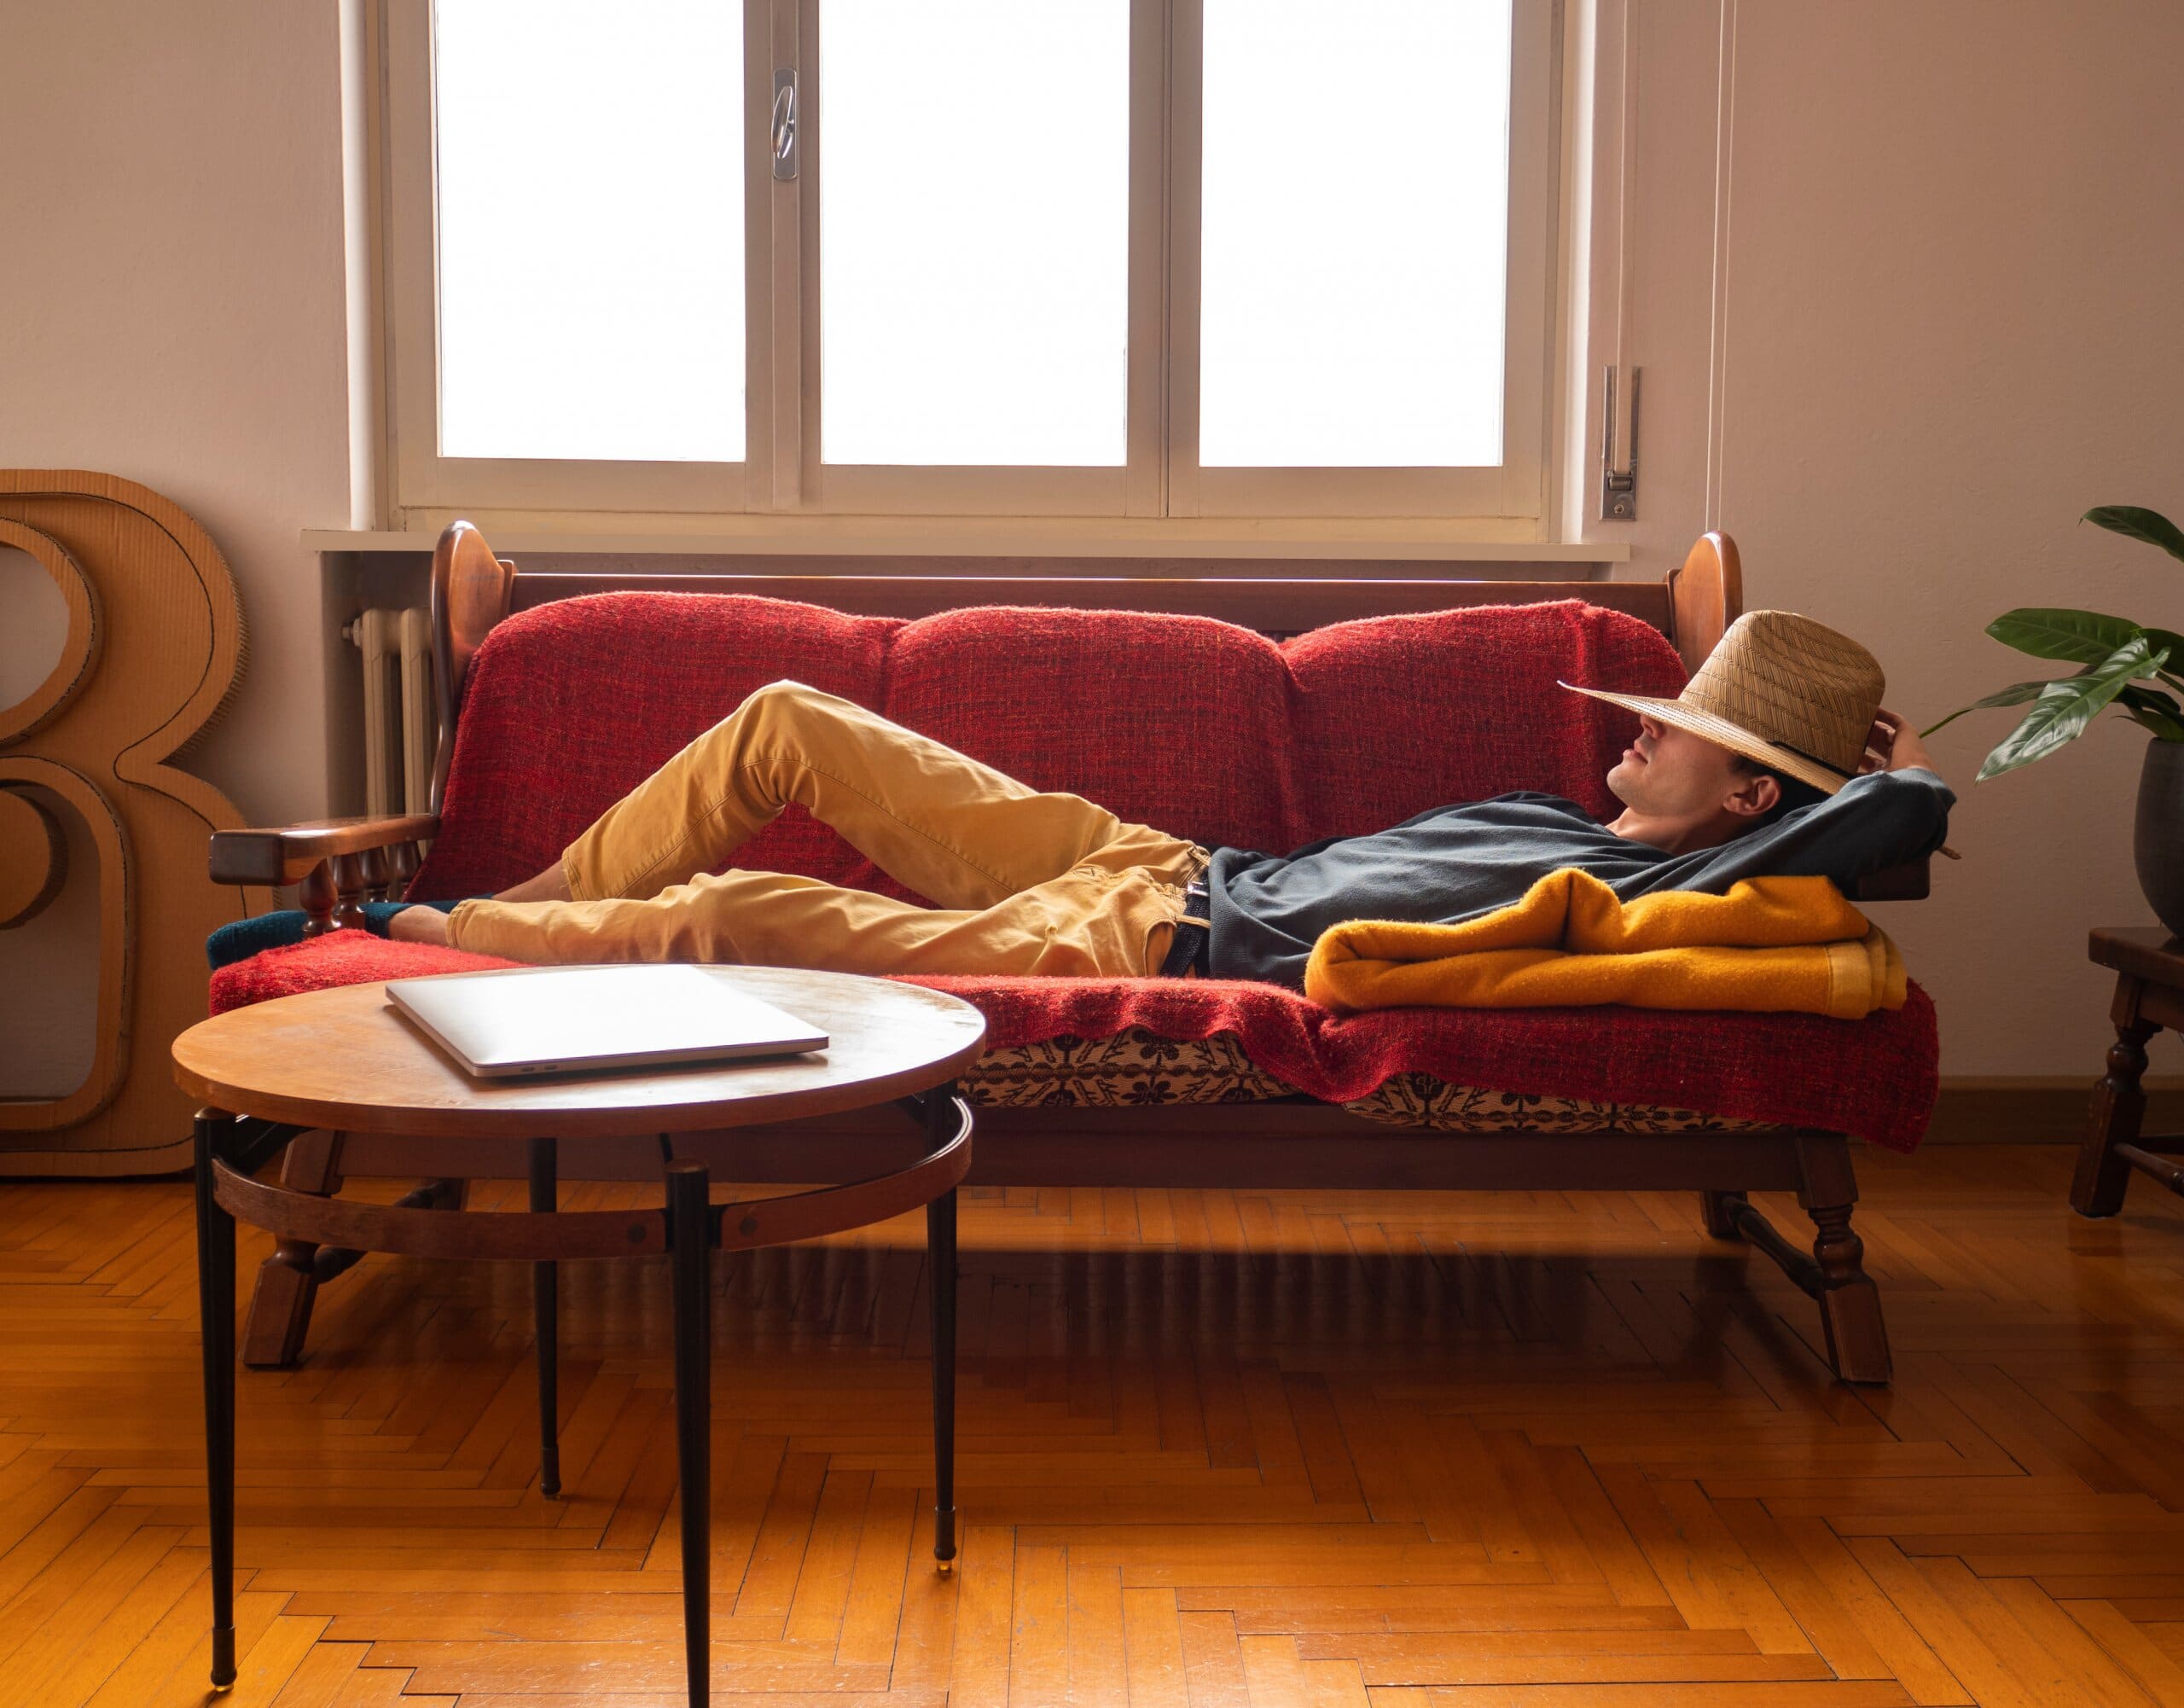 Man wearing hat over his face laying on a red sofa, having a nap.